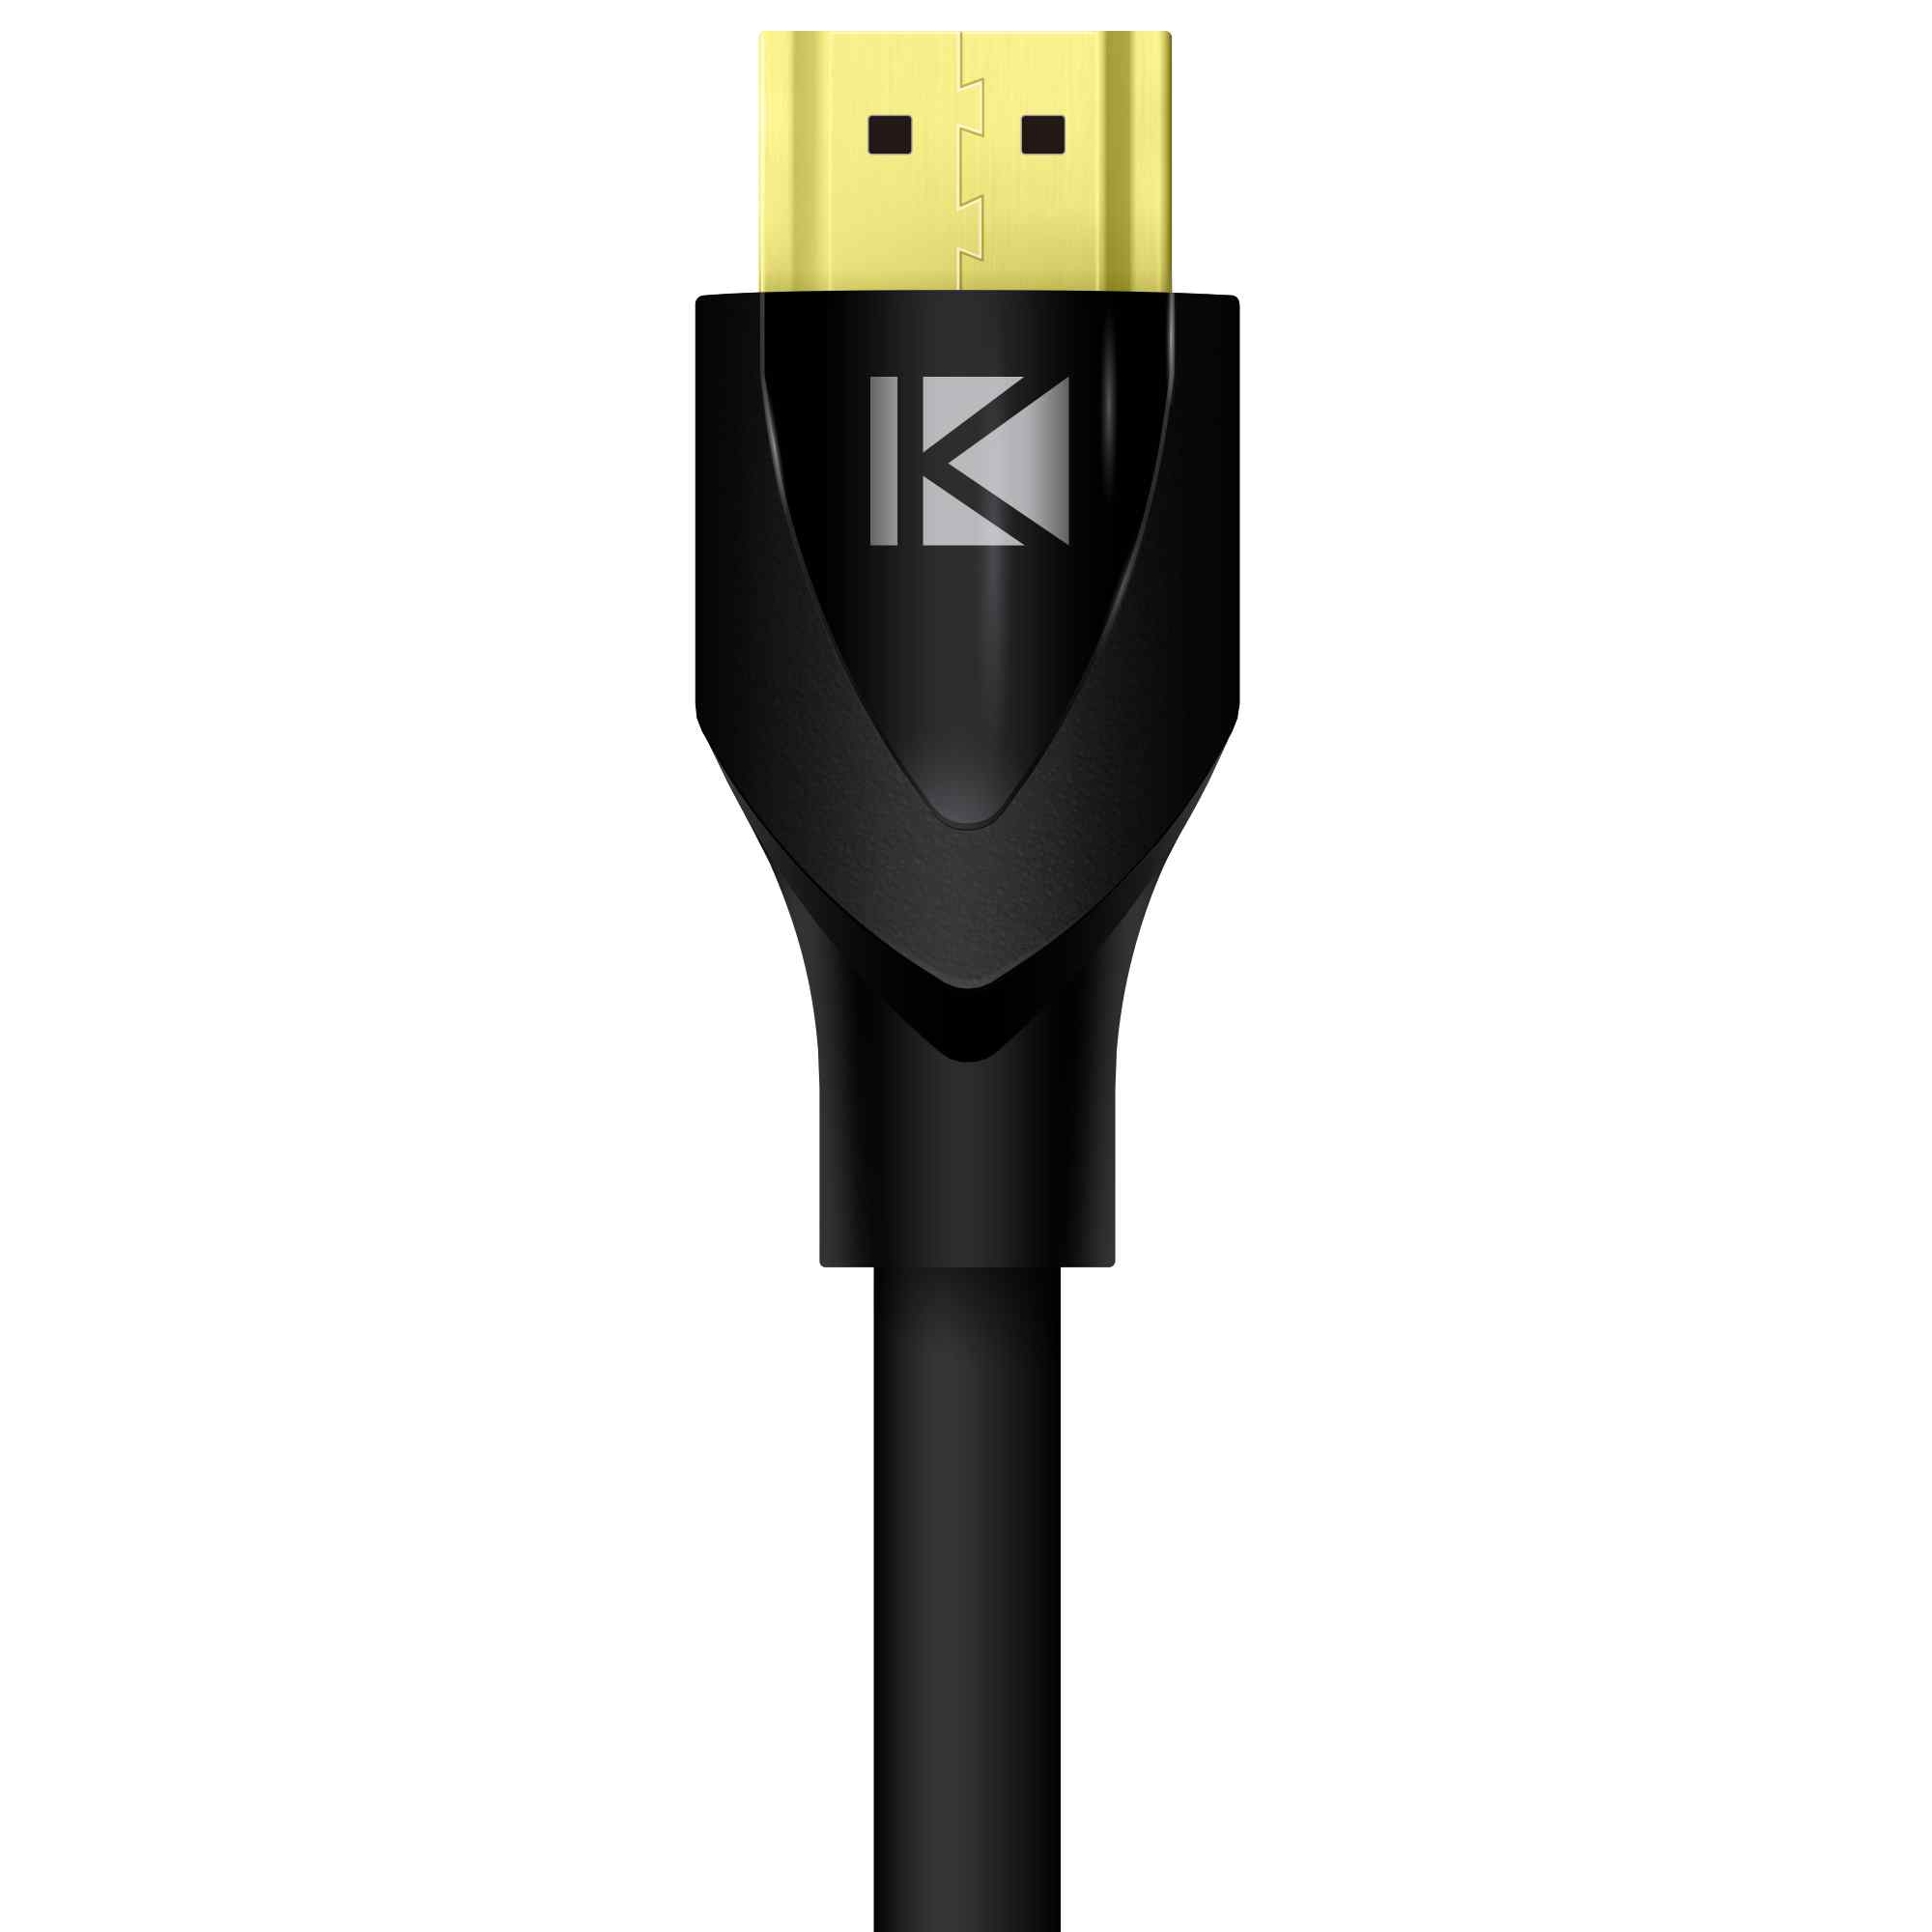 Thumbnail of key Digital ultra high speed hdmi cable Rear View